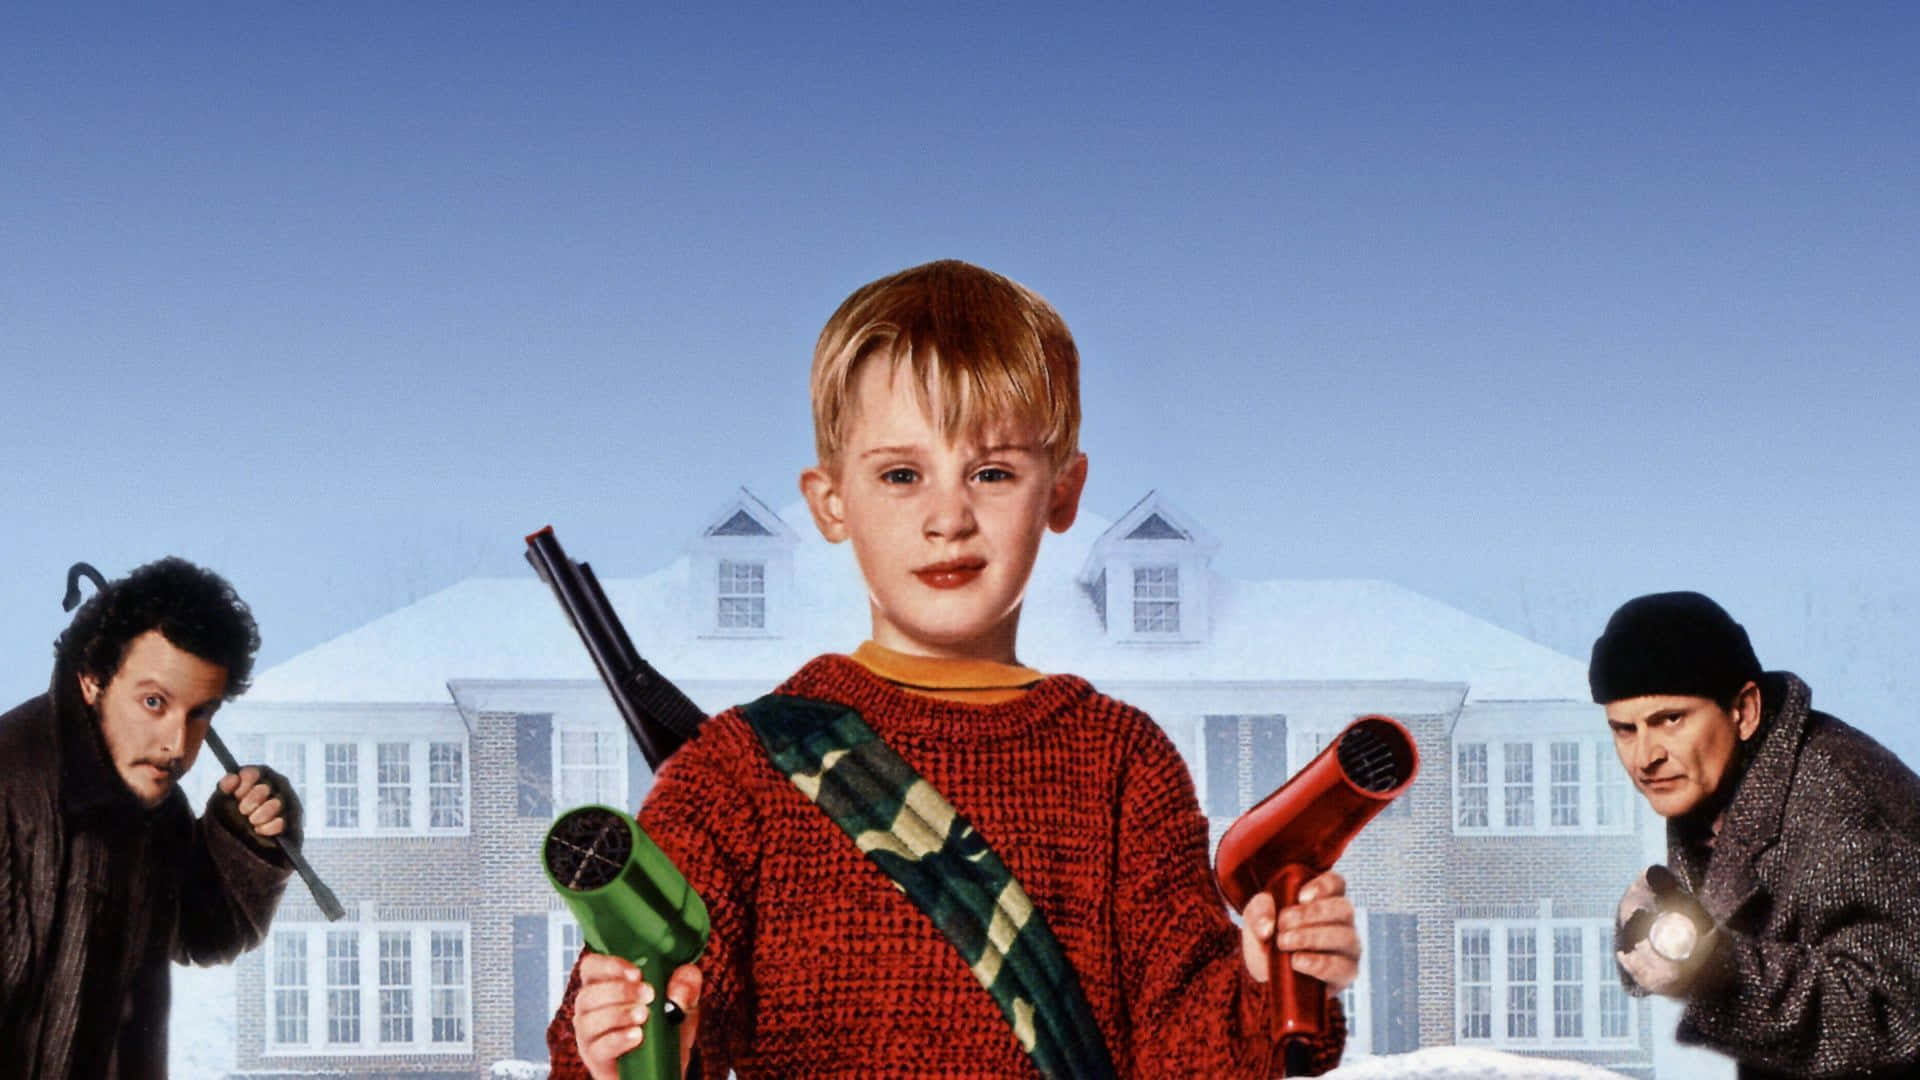 A Young Boy Holding Two Guns In Front Of A House Wallpaper